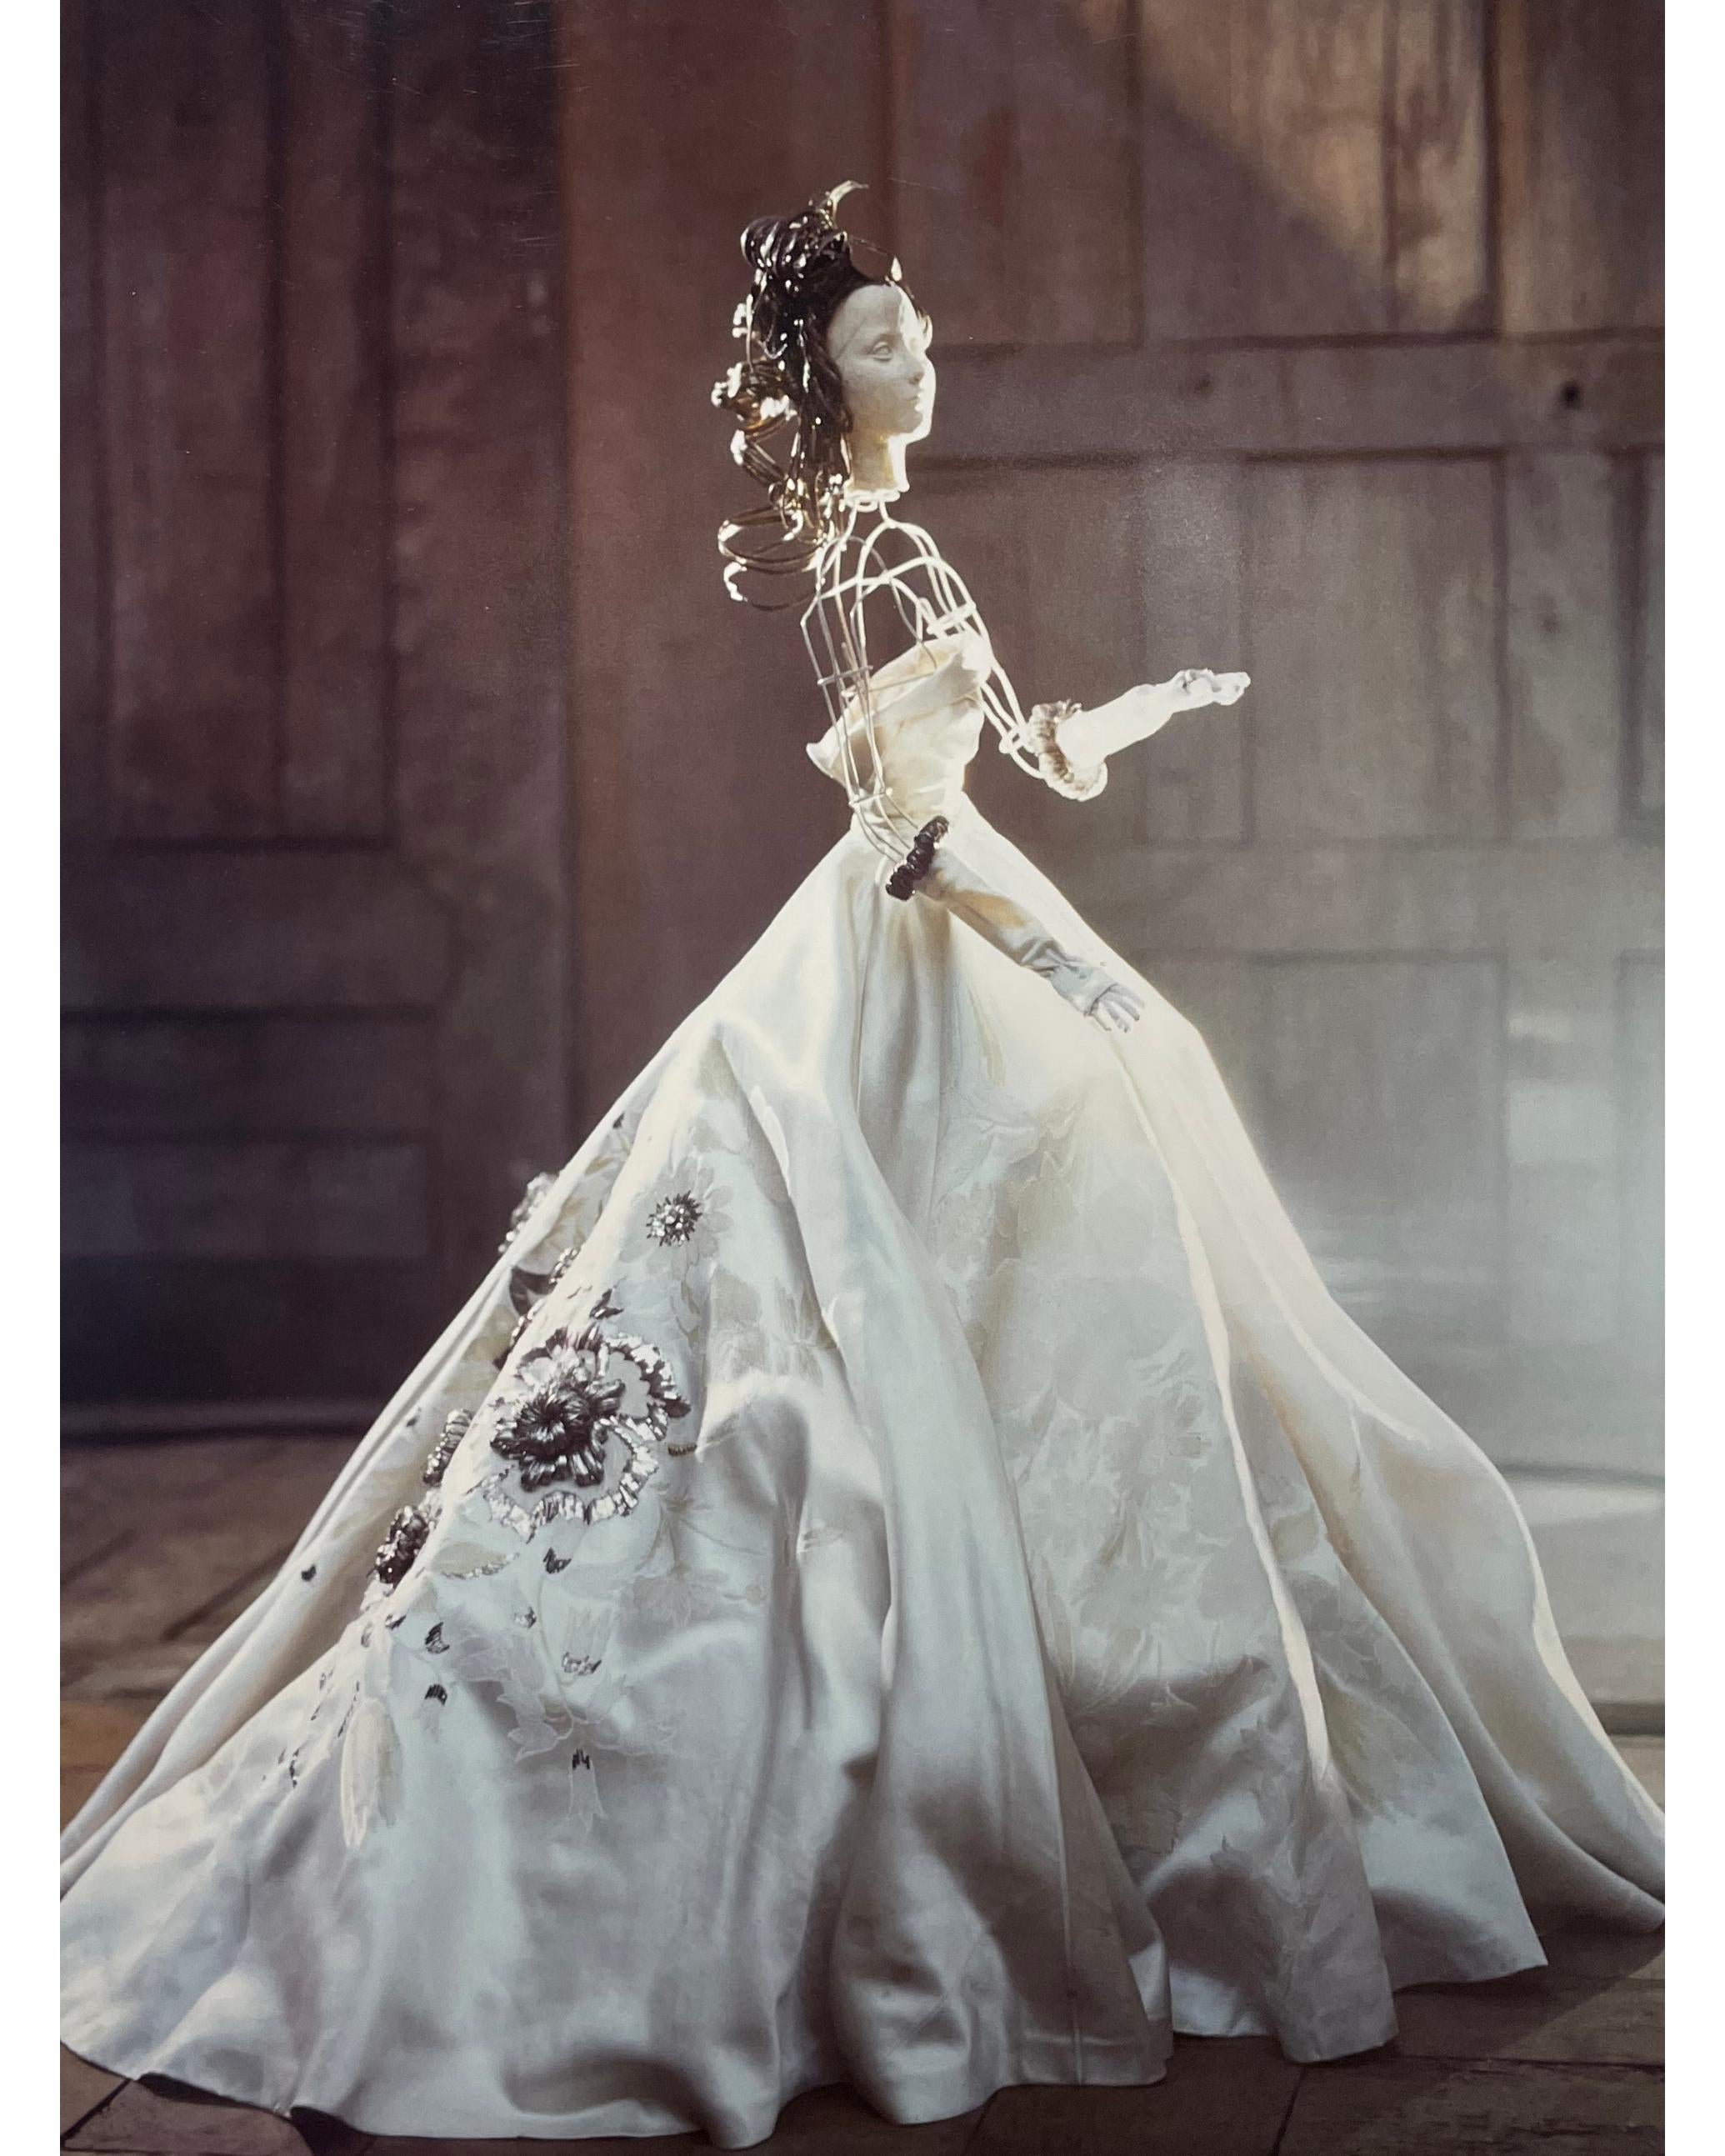 Dress by Jeanne Lafaurie - Photograph by David Seidner